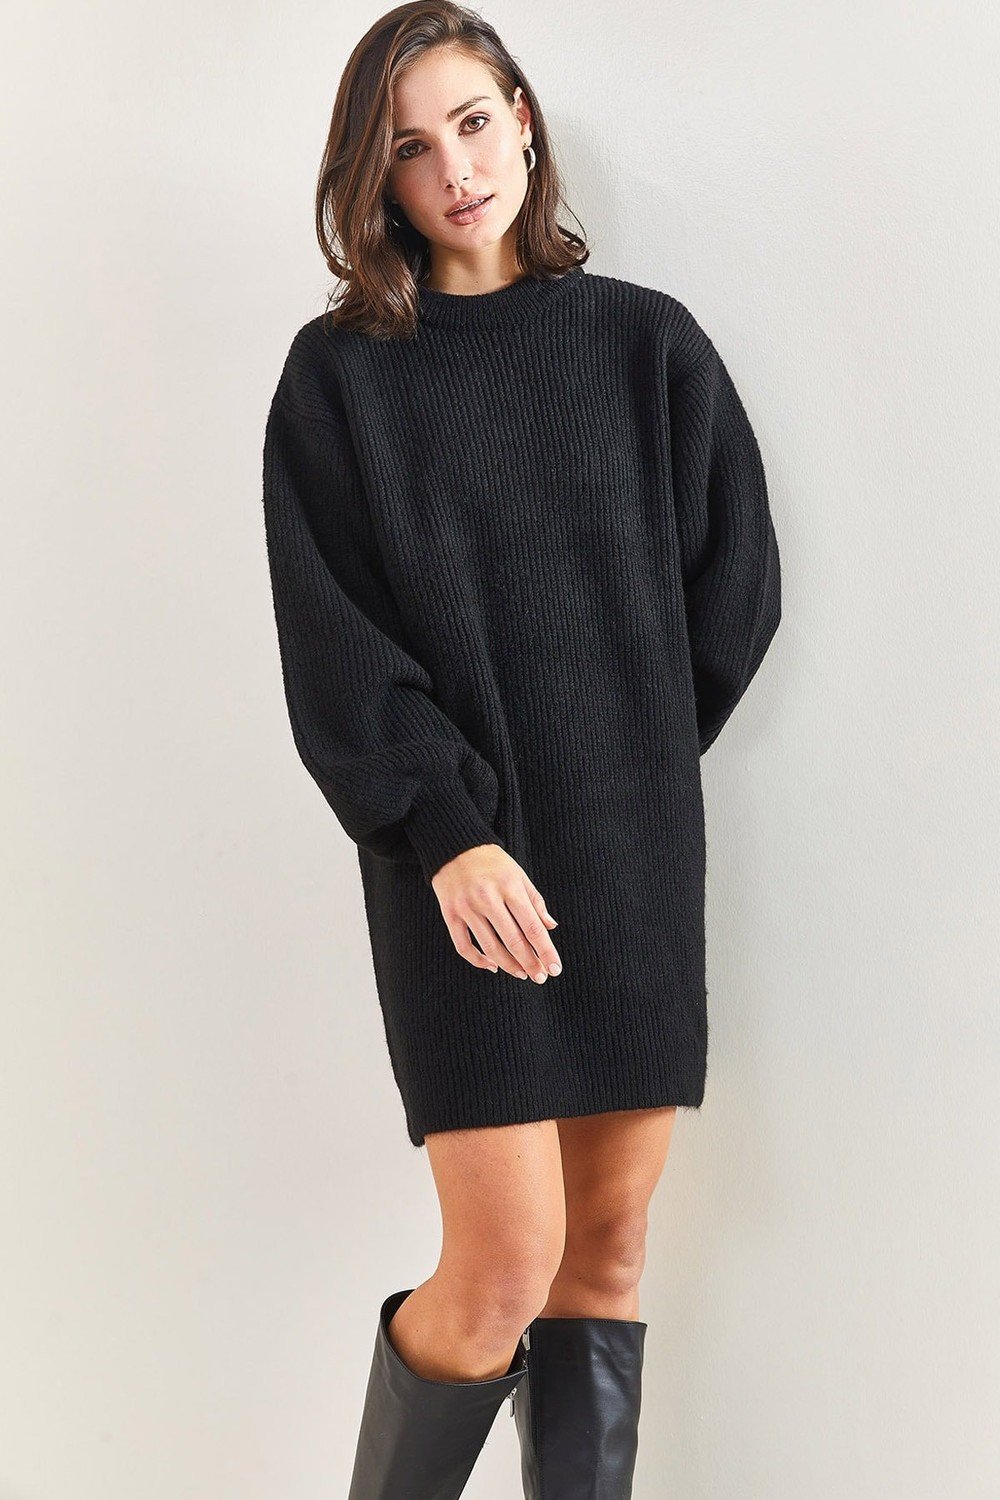 Bianco Lucci Tunic - Black - Relaxed fit